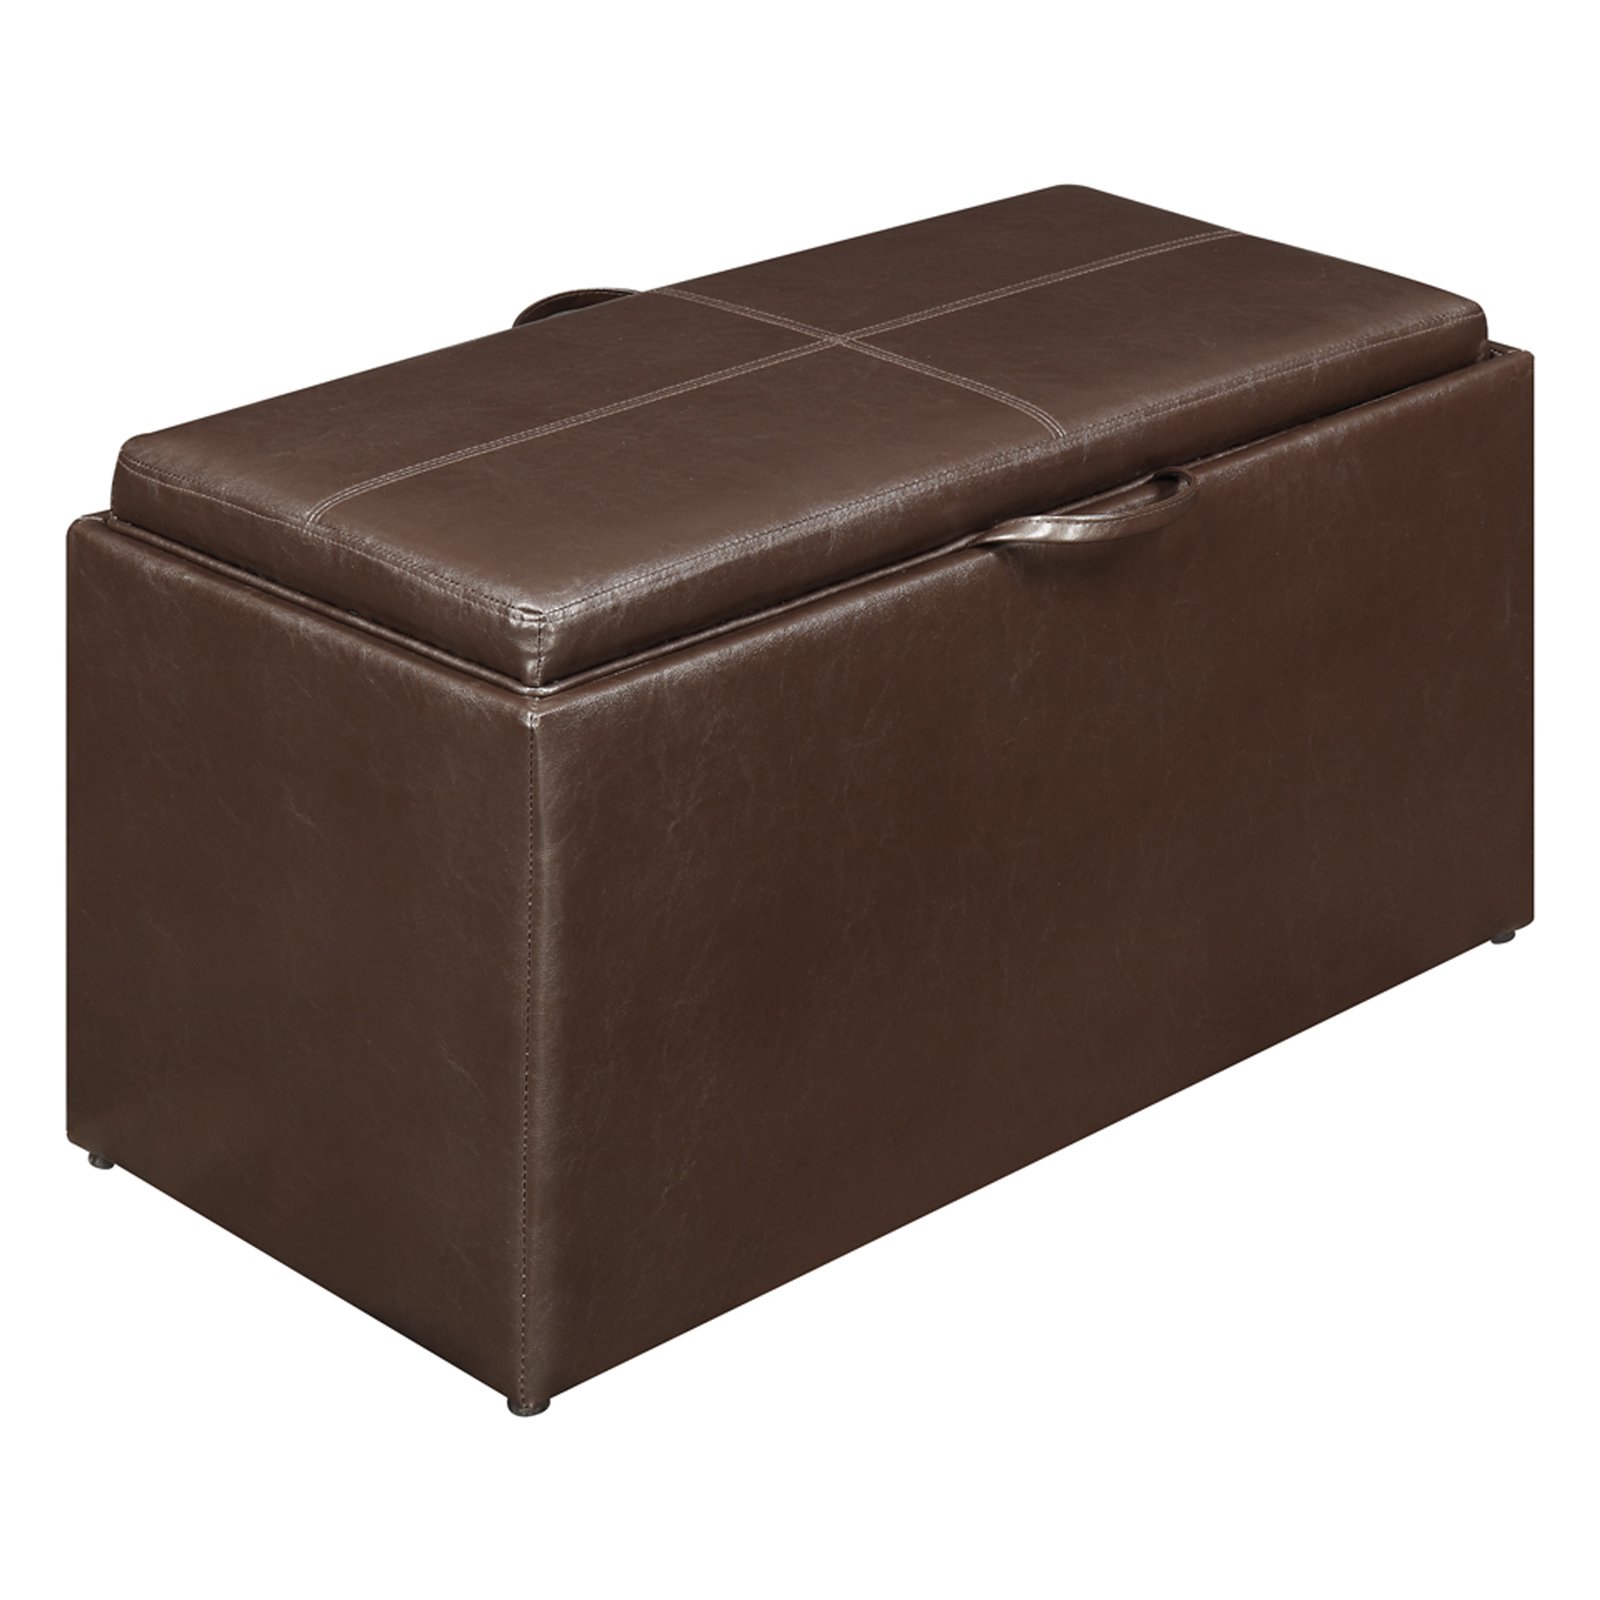 Designs4Comfort Faux Leather Storage Bench with 4 Collapsible Ottomans, Espresso - image 4 of 7